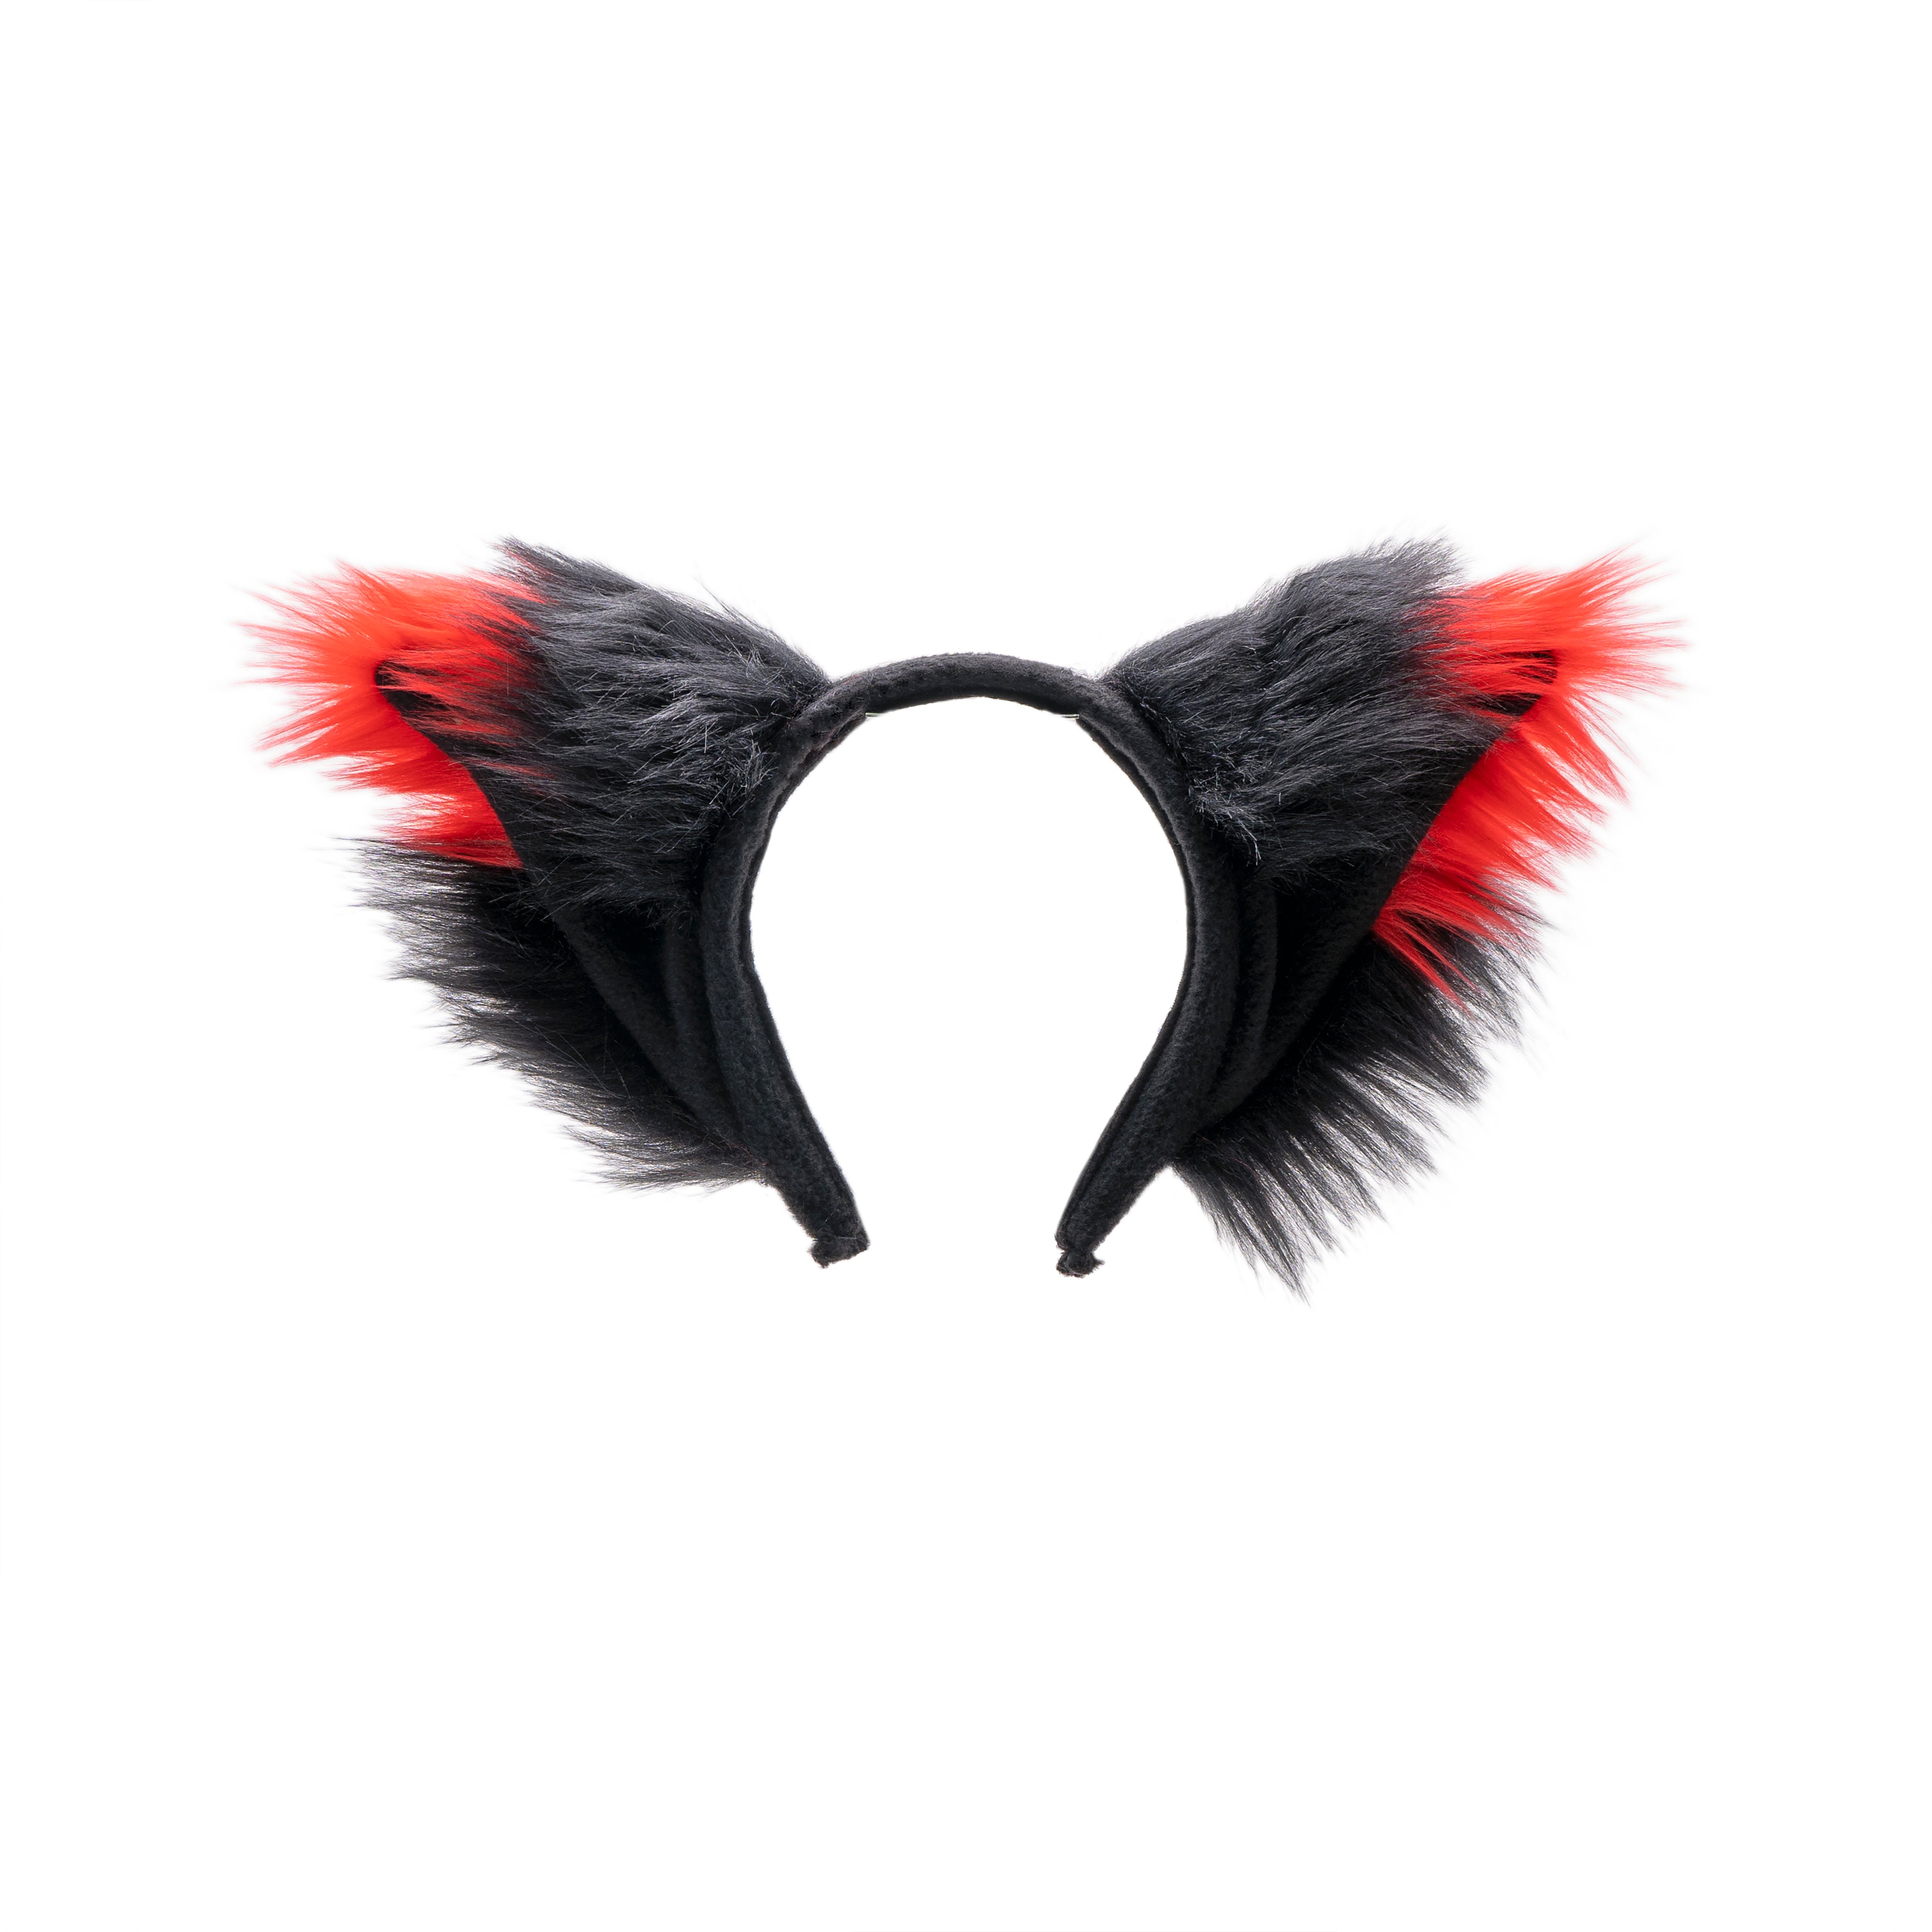 red  Pawstar Yip Tip Ear furry Headband for halloween costumes, cosplay, and partial fursuit. Made in the usa